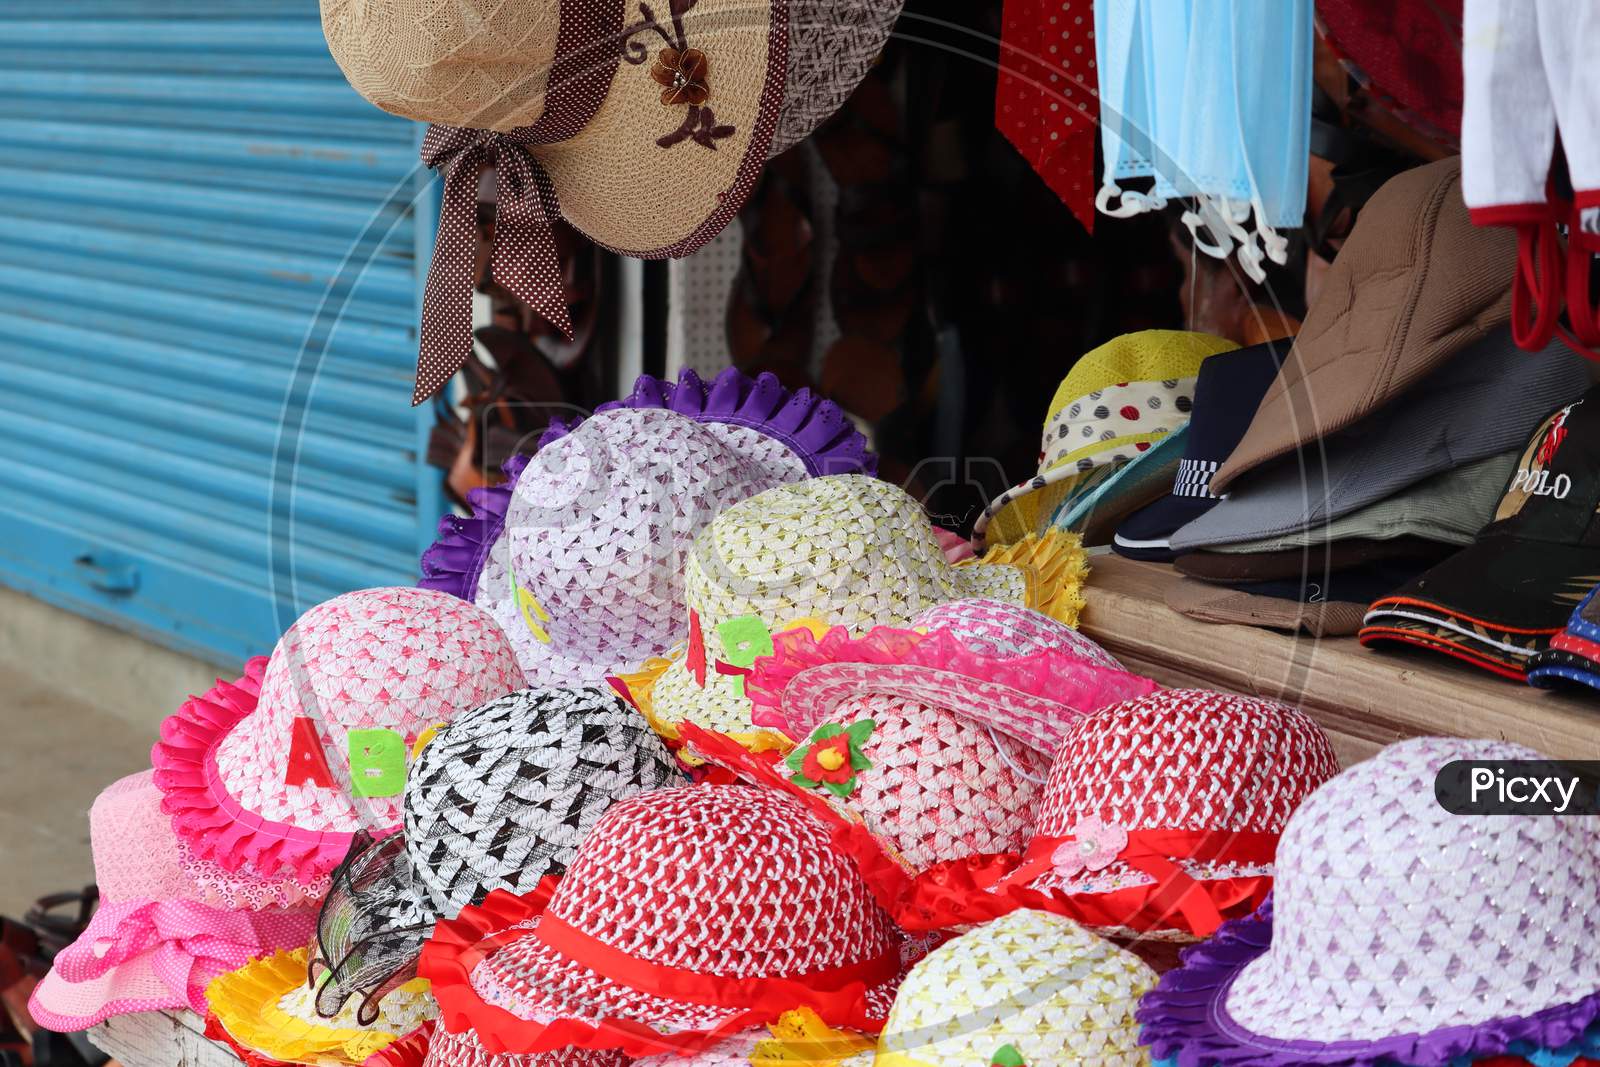 Attractive Caps Of Beautiful Workmanship Decorated At The Retail Shop For The Upcoming Festivities